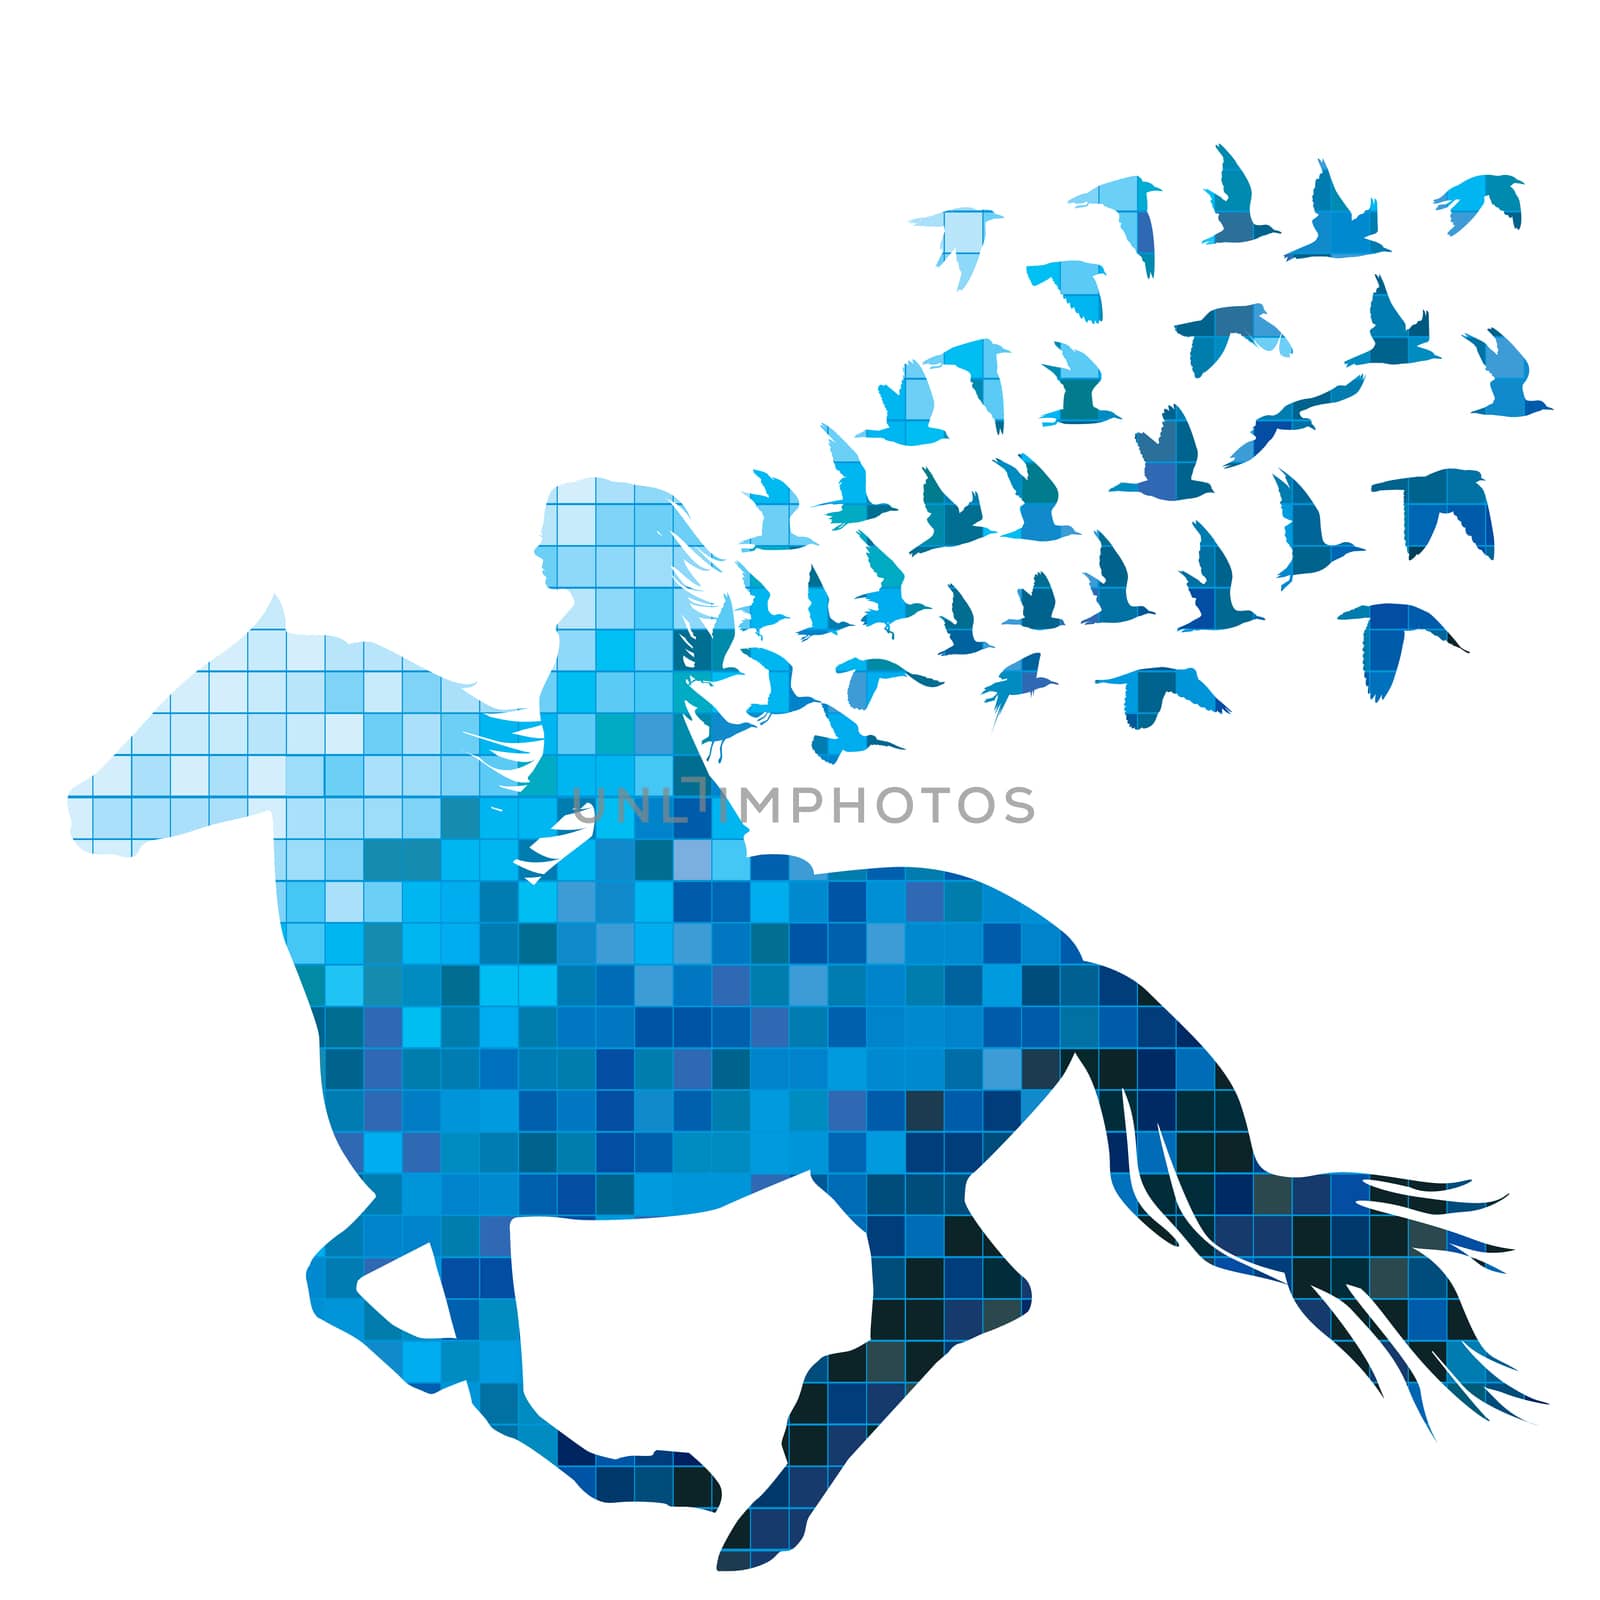 Mosaic tile style of woman rider with birds